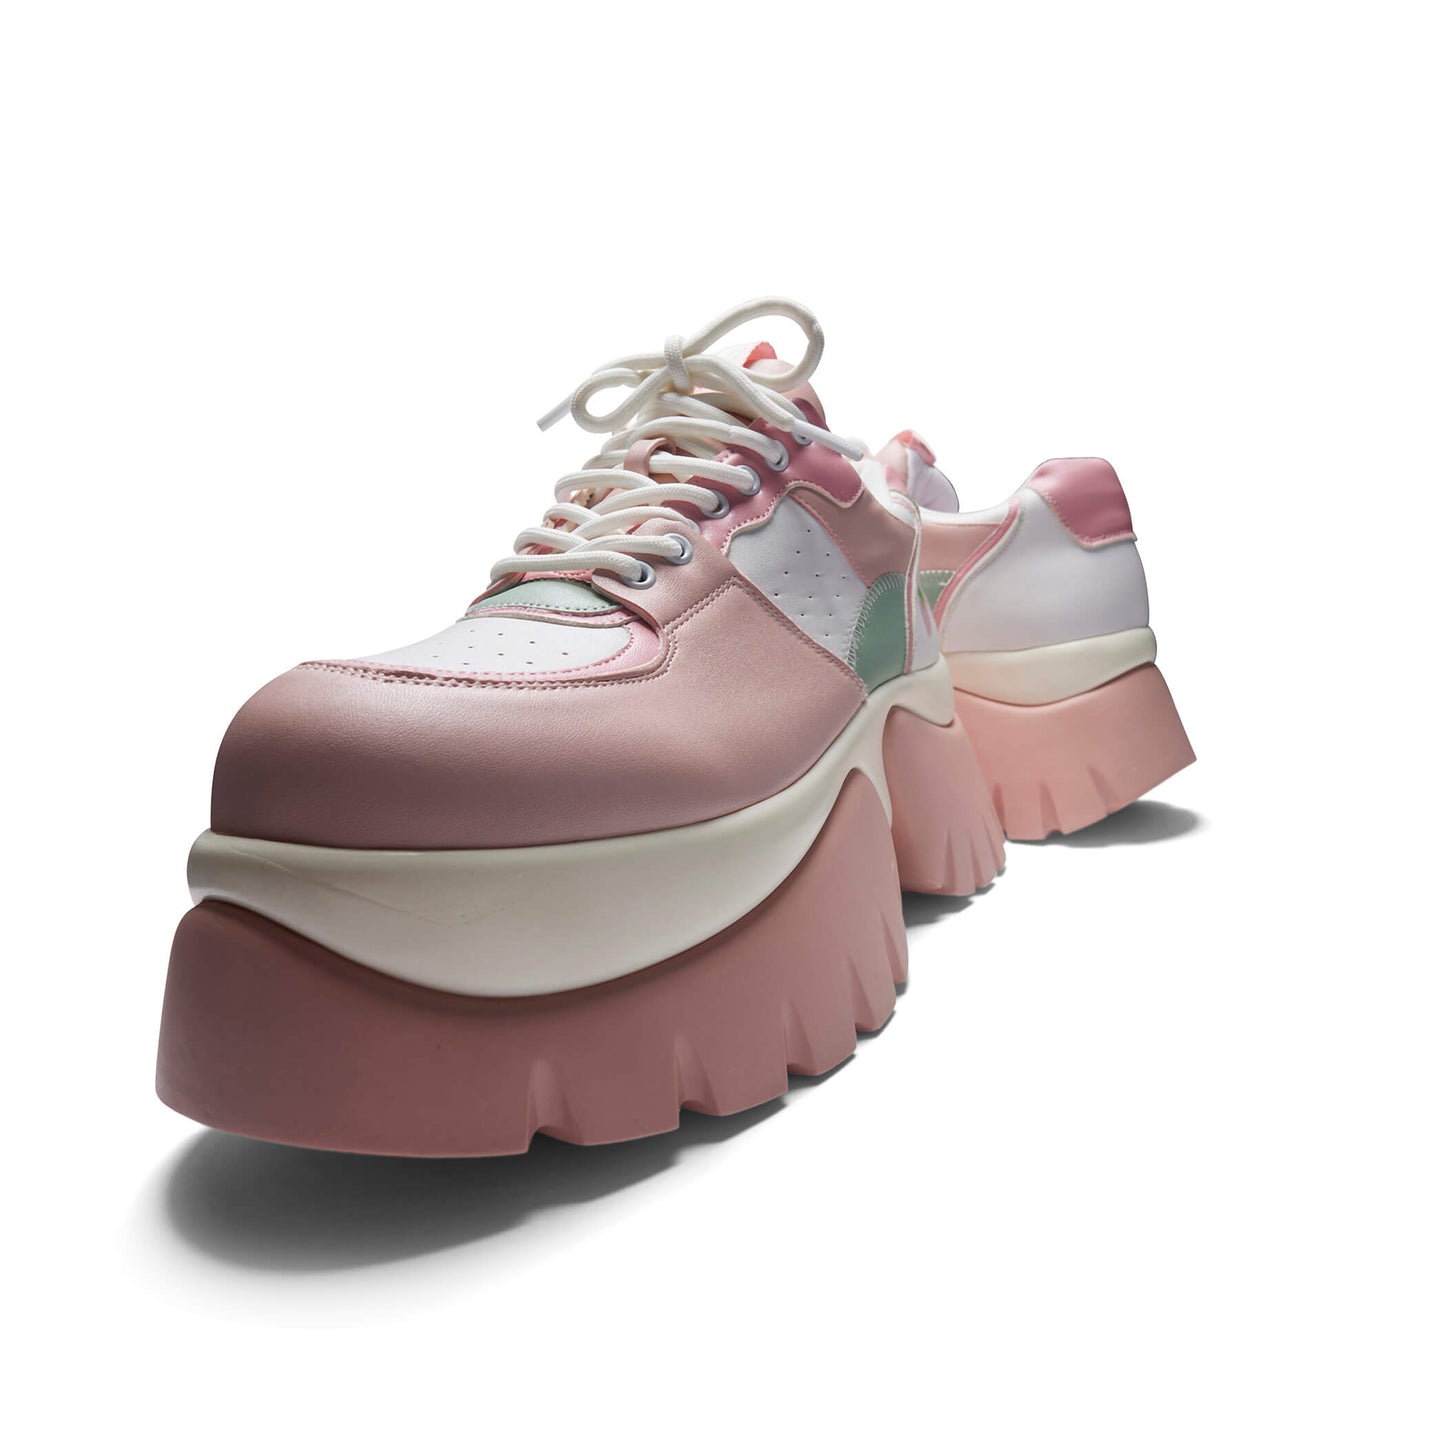 Strawberry Juice Trainers - Trainers - KOI Footwear - Pink - Front Detail